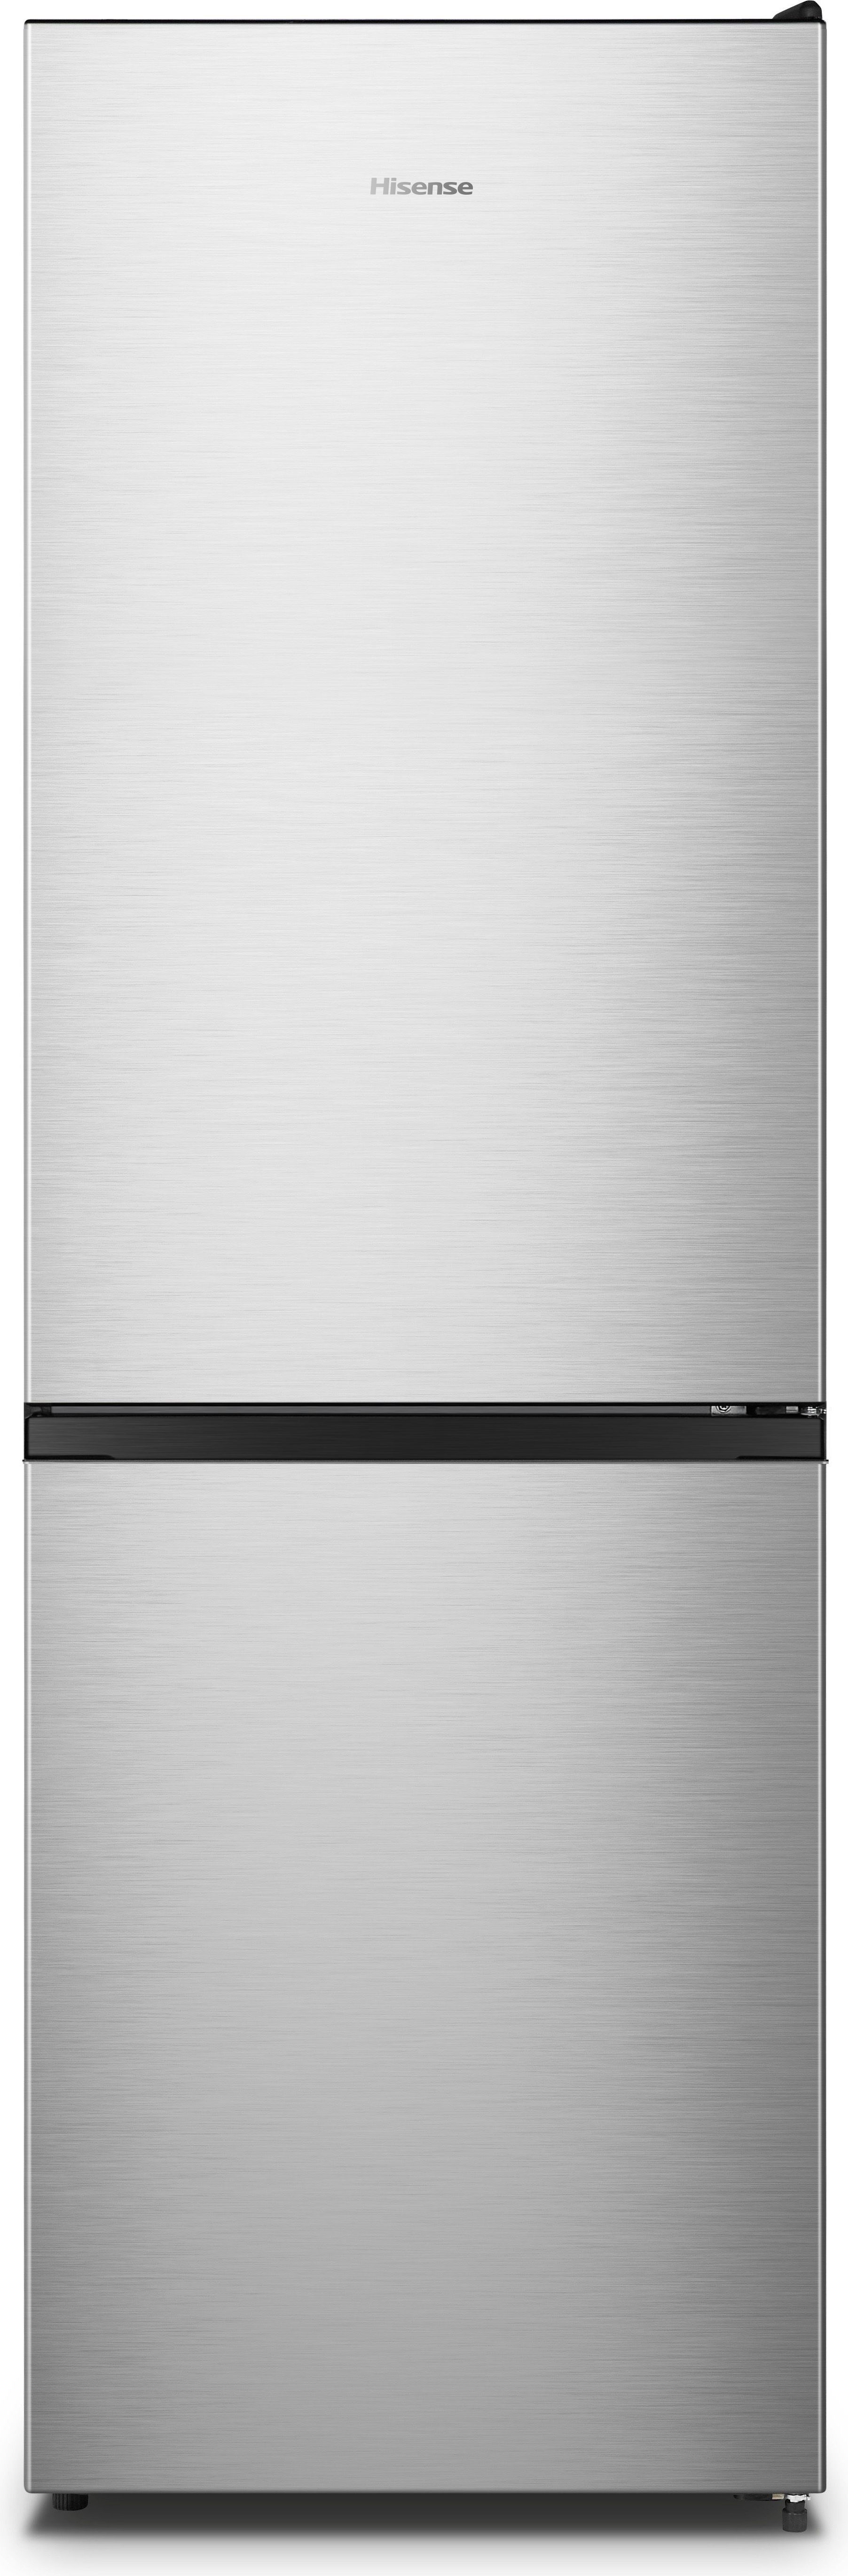 Hisense RB390N4ACE 60/40 No Frost Fridge Freezer - Stainless Steel - E Rated, Stainless Steel